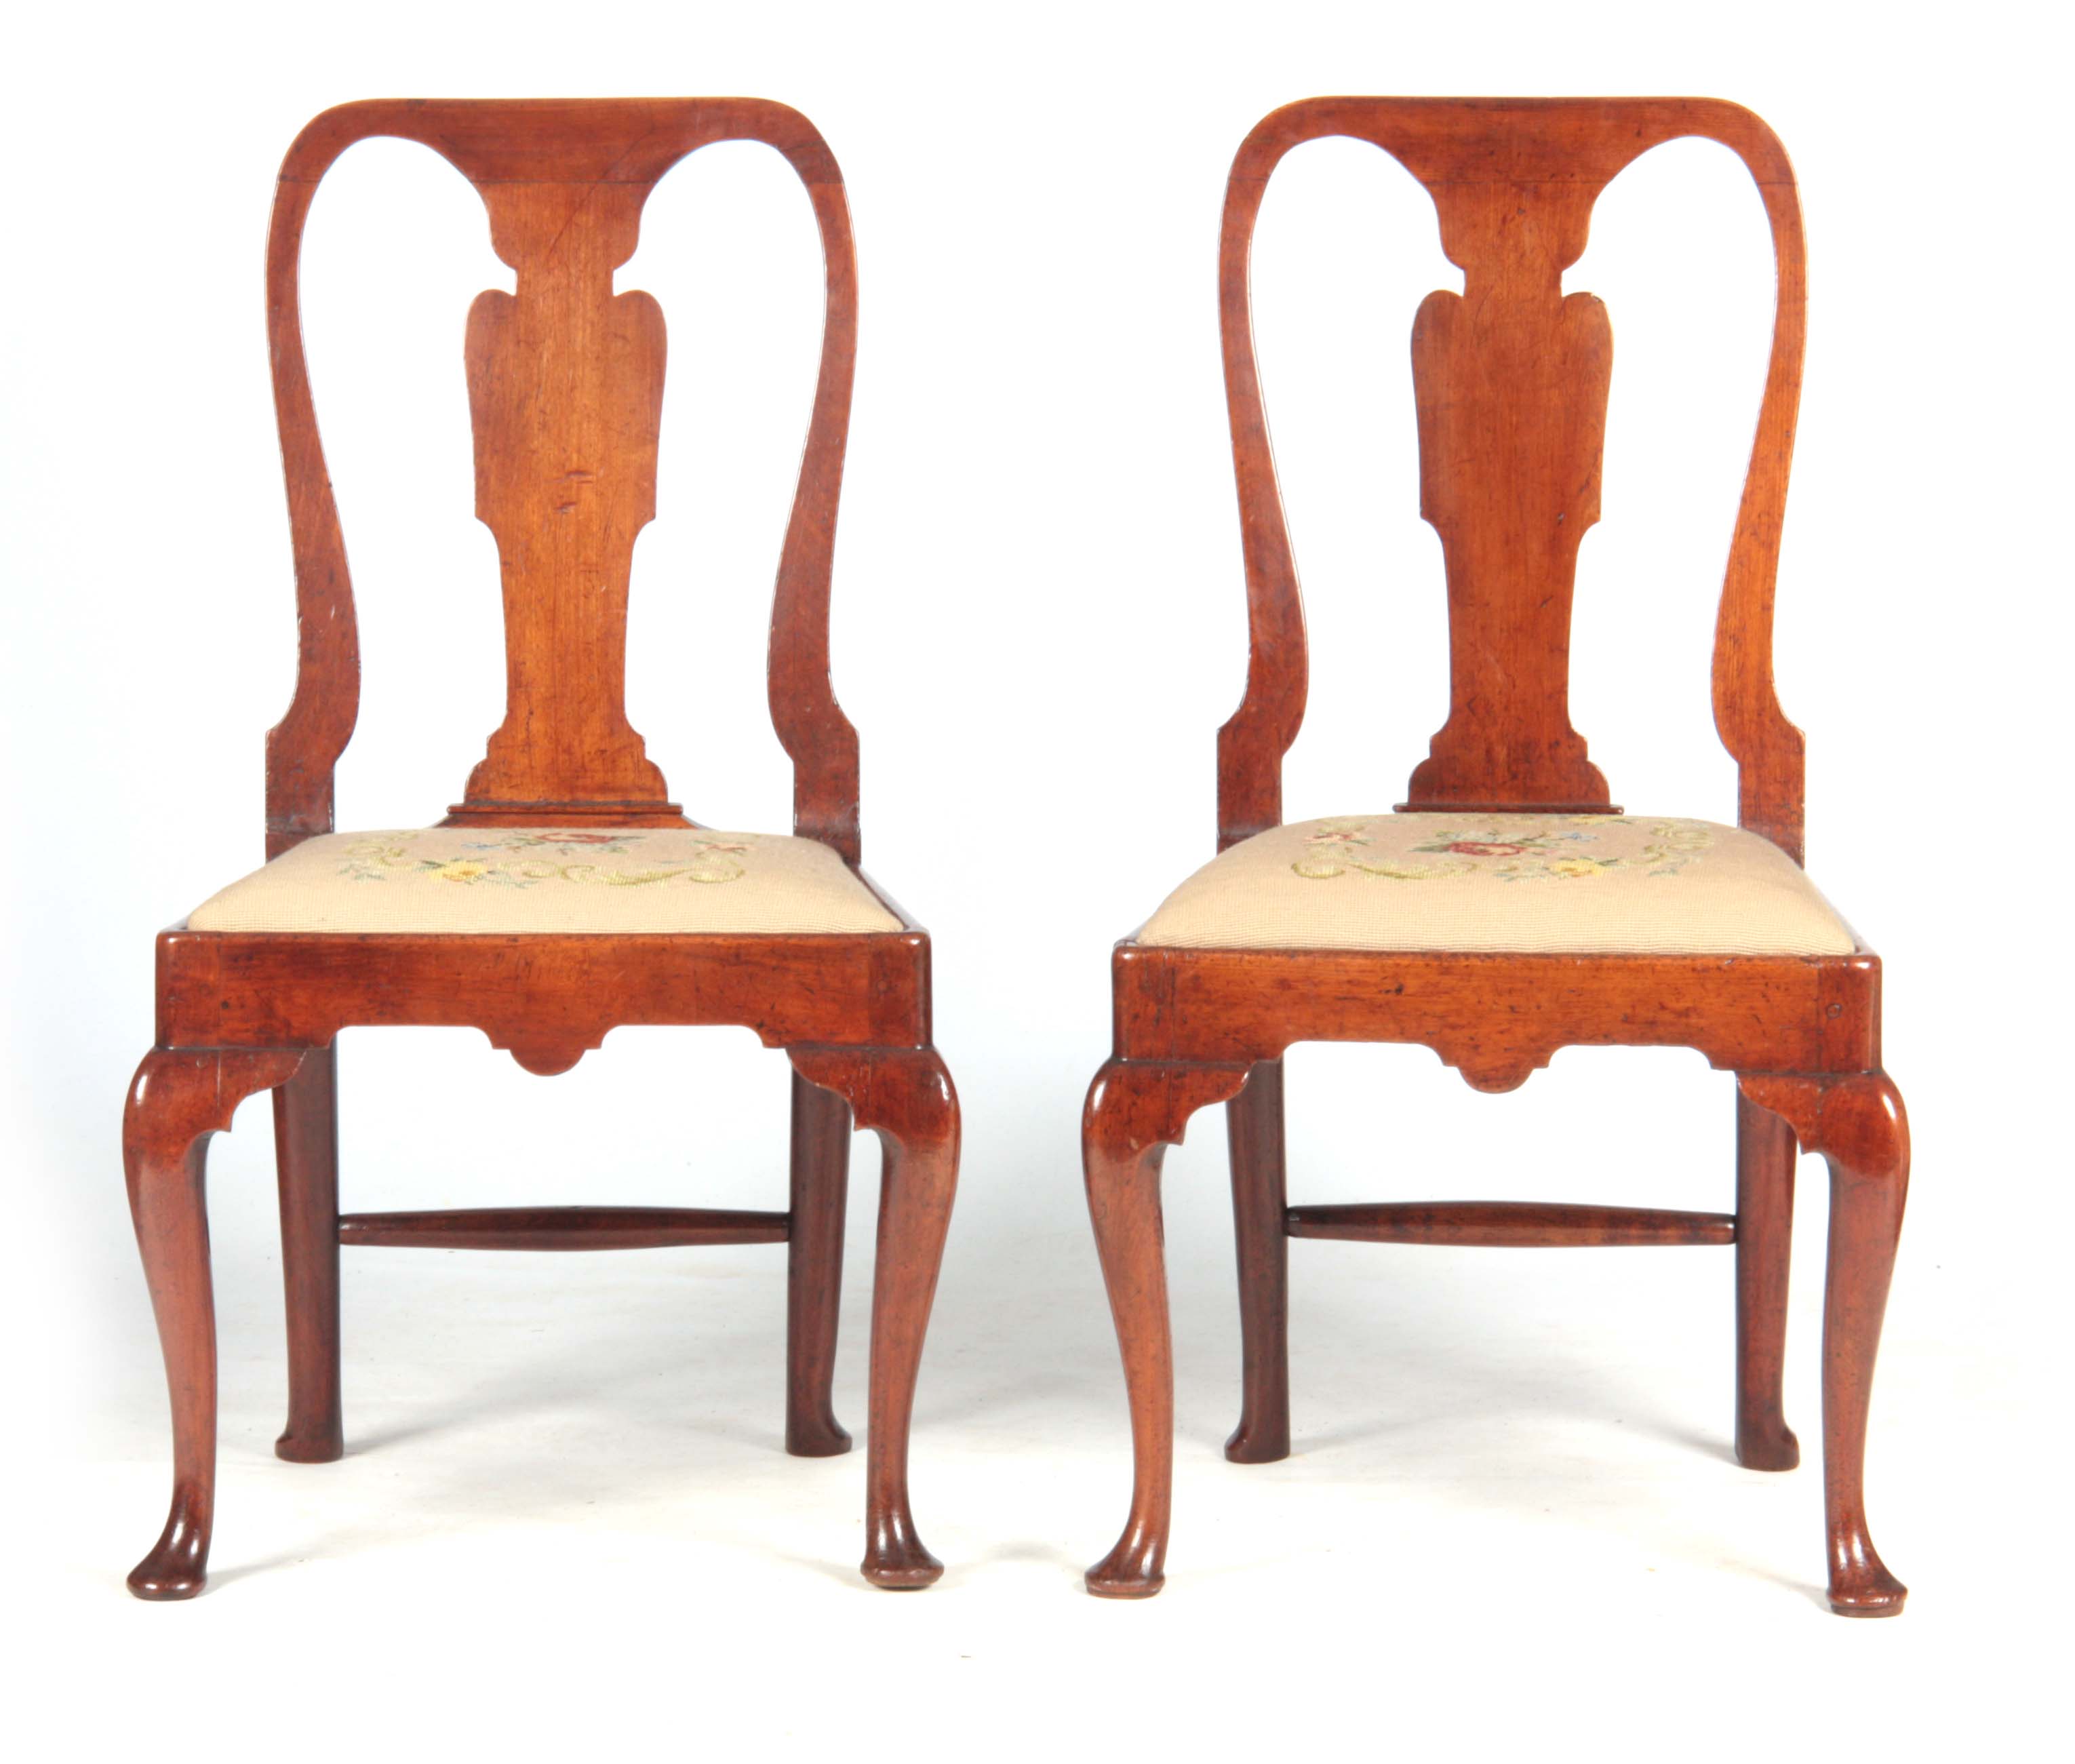 A PAIR OF GEORGE I WALNUT SIDE CHAIRS with shaped backs and vase back splats, drop-in tapestry